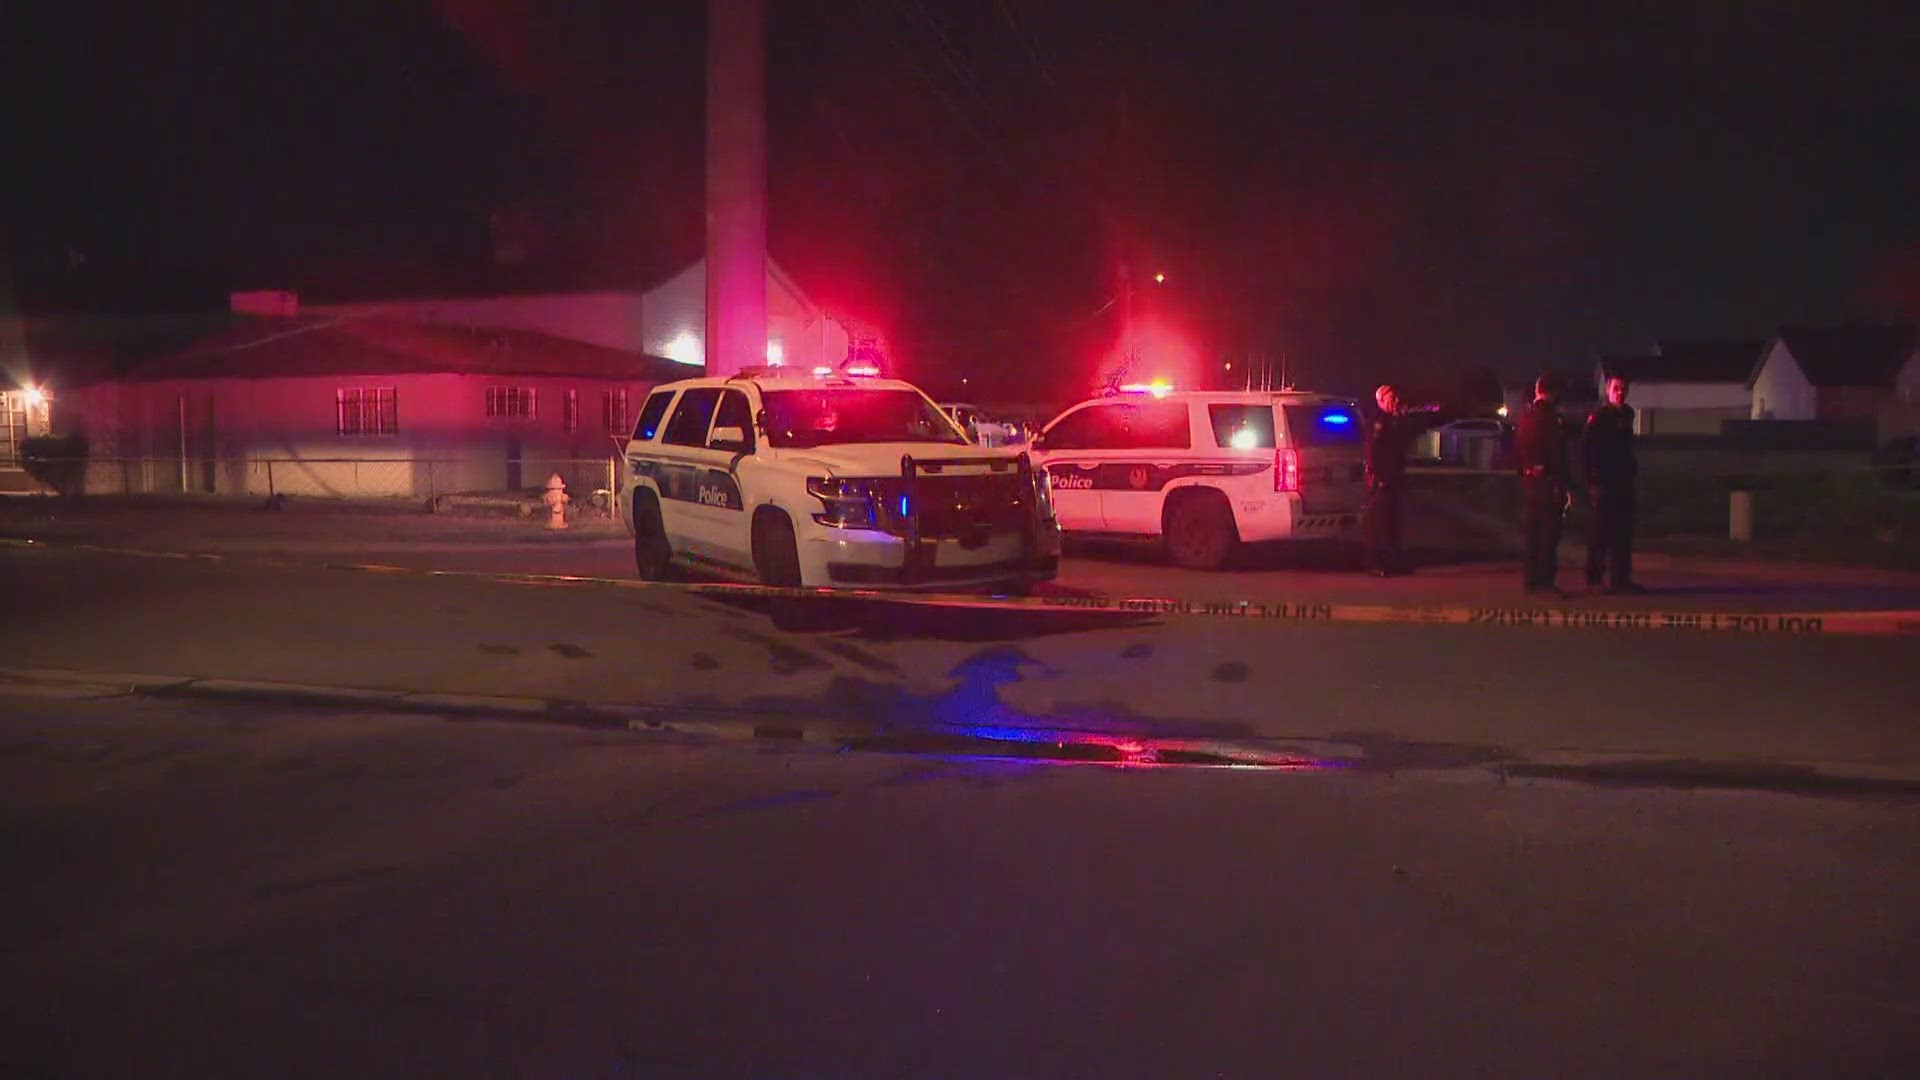 An investigation has been launched after a teenager was injured in a shooting in south Phoenix, according to Phoenix police.